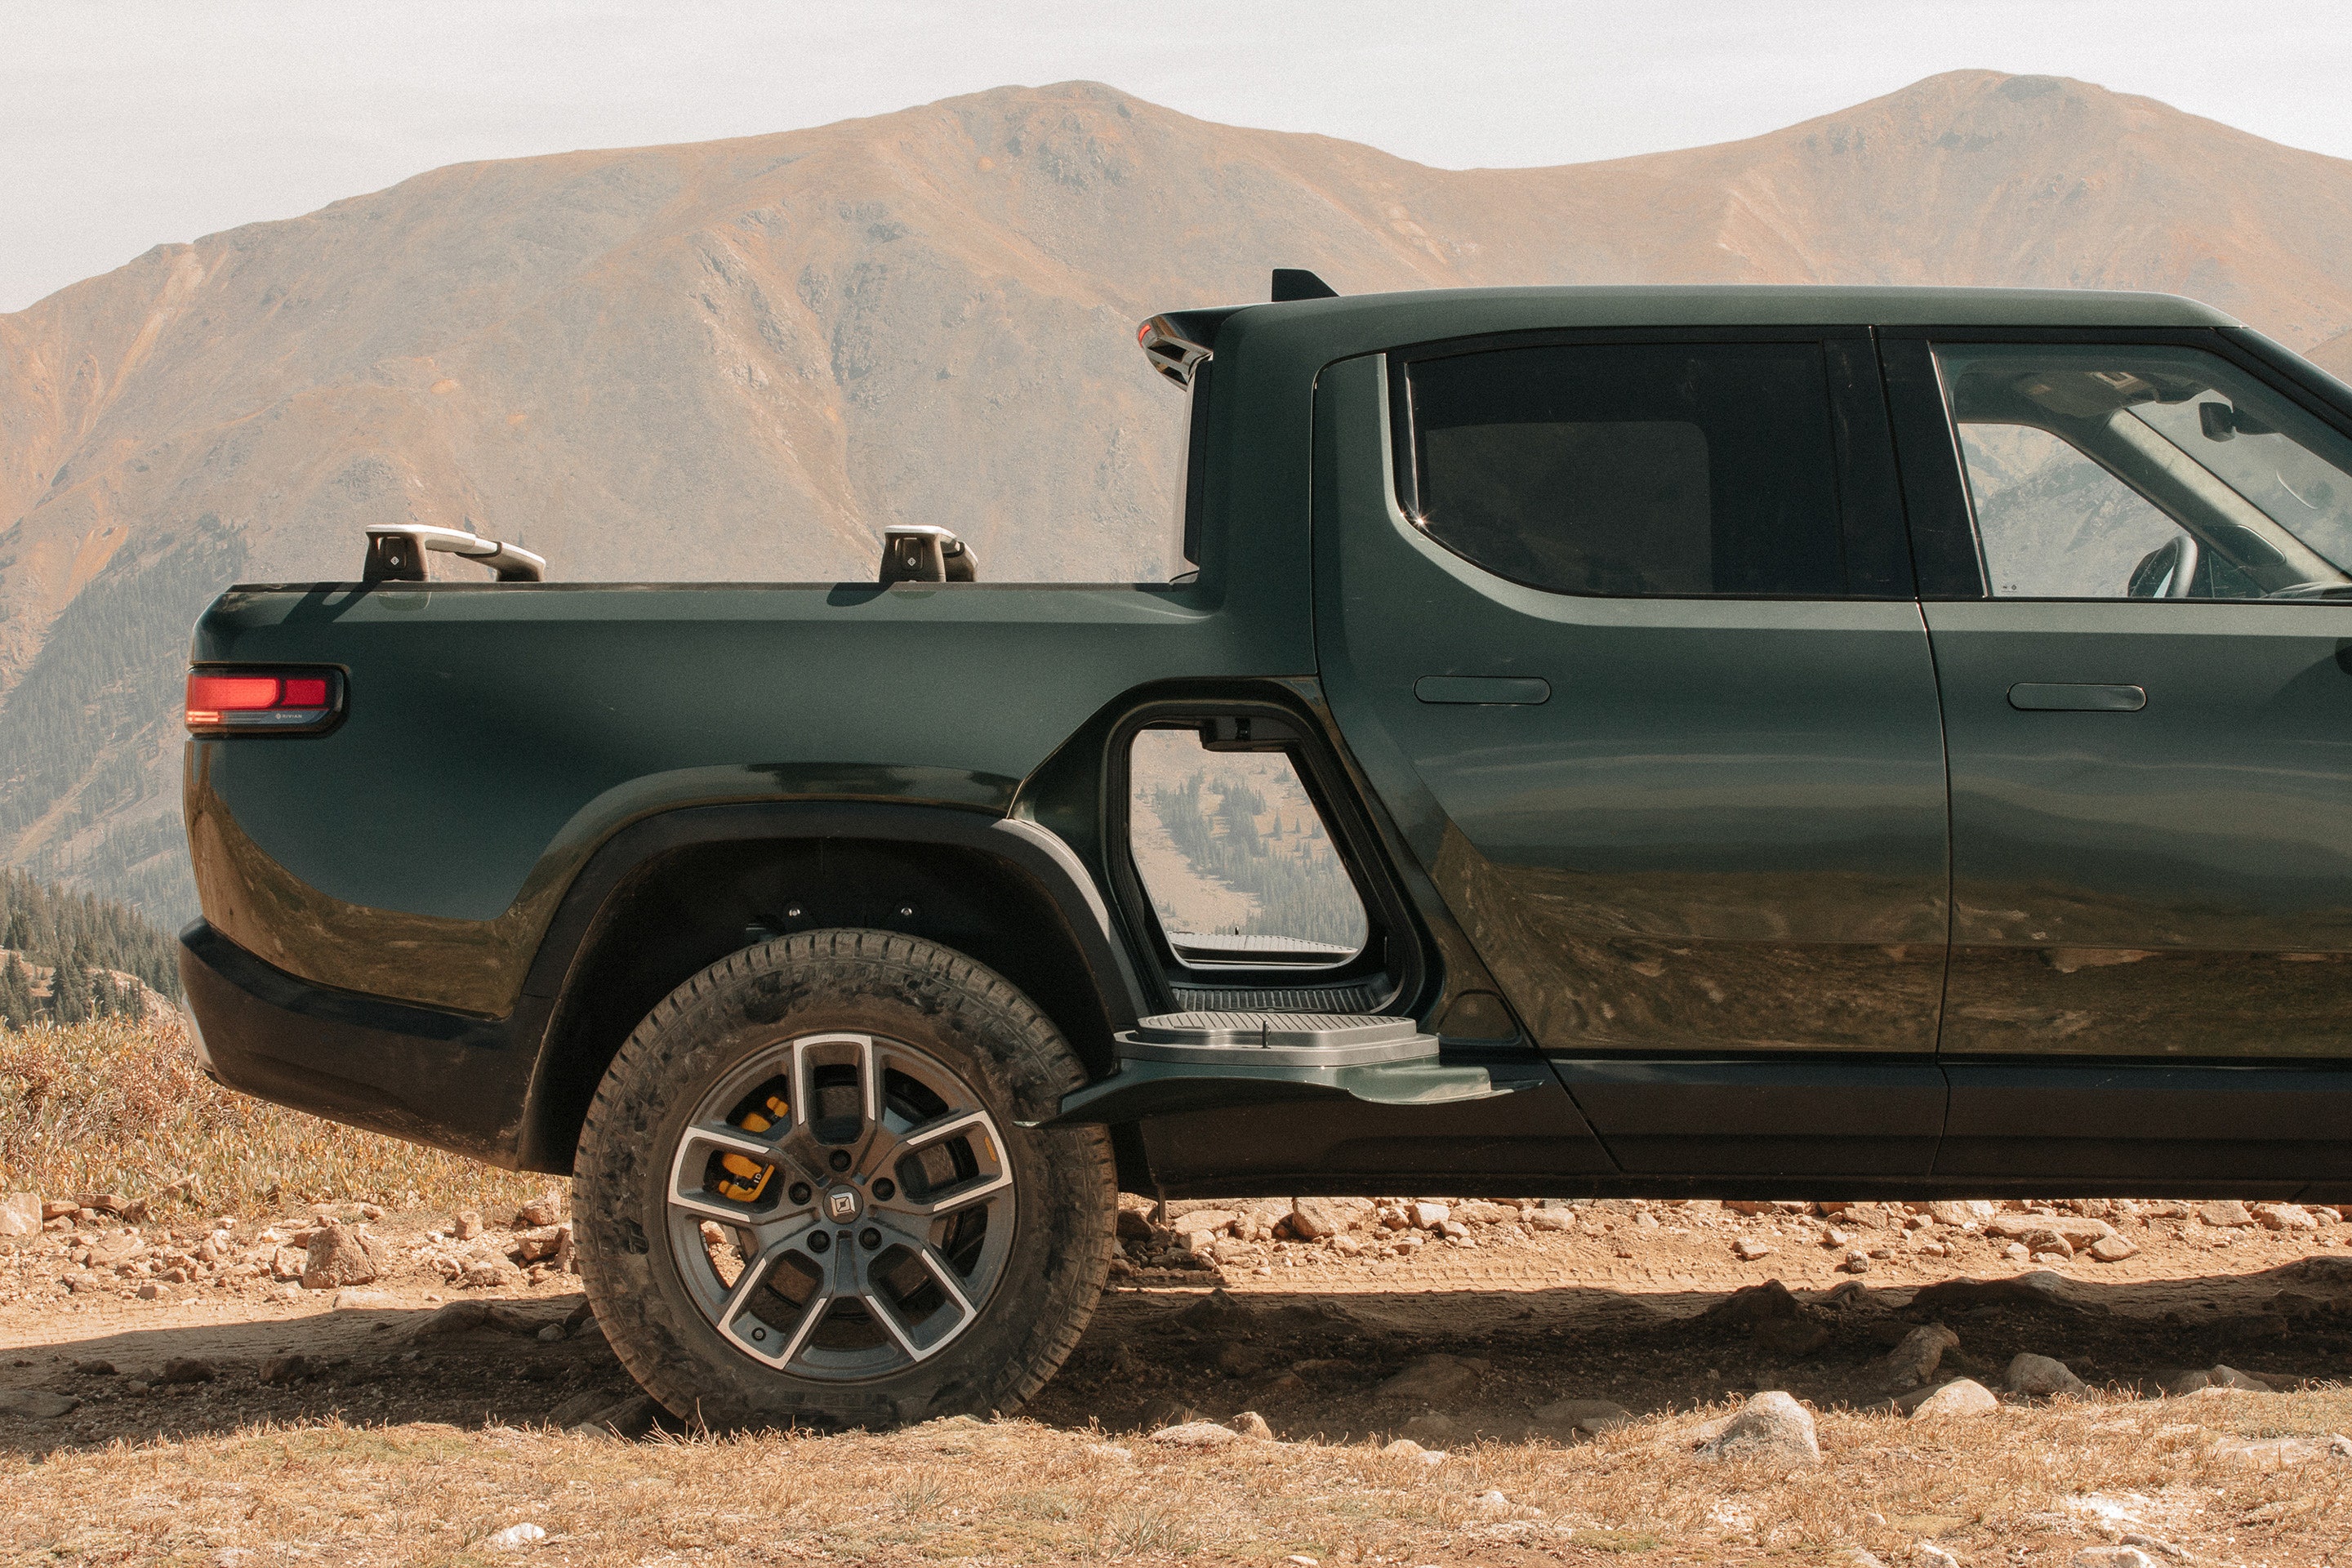 Rivian Now Has Highest Range EV Pickup Truck In Market: How It Compares To Ford's F-150 Lightning And Tesla's Cybertruck